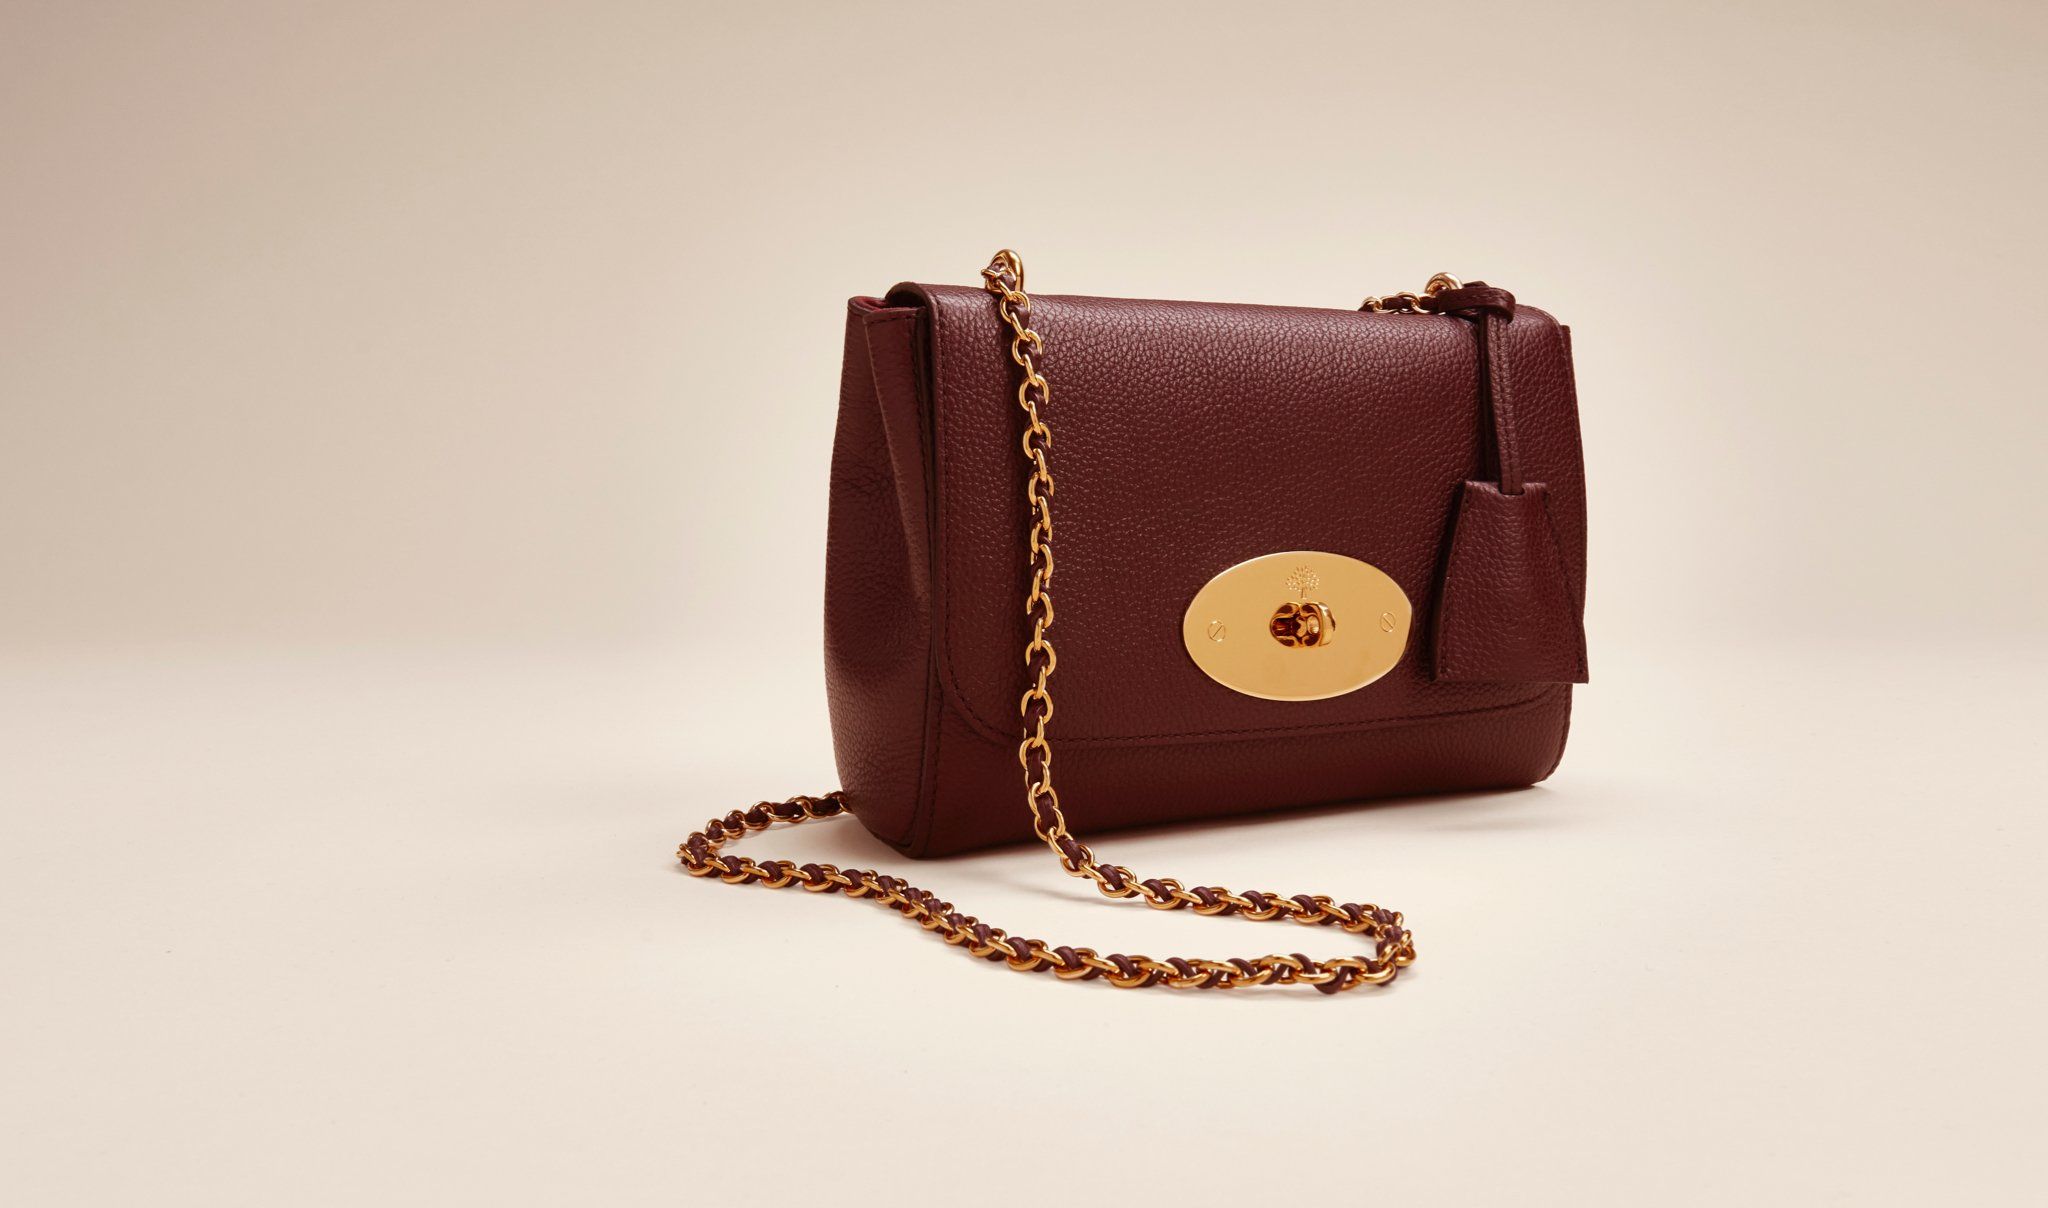 Mulberry Lily handbag in burgundy leather